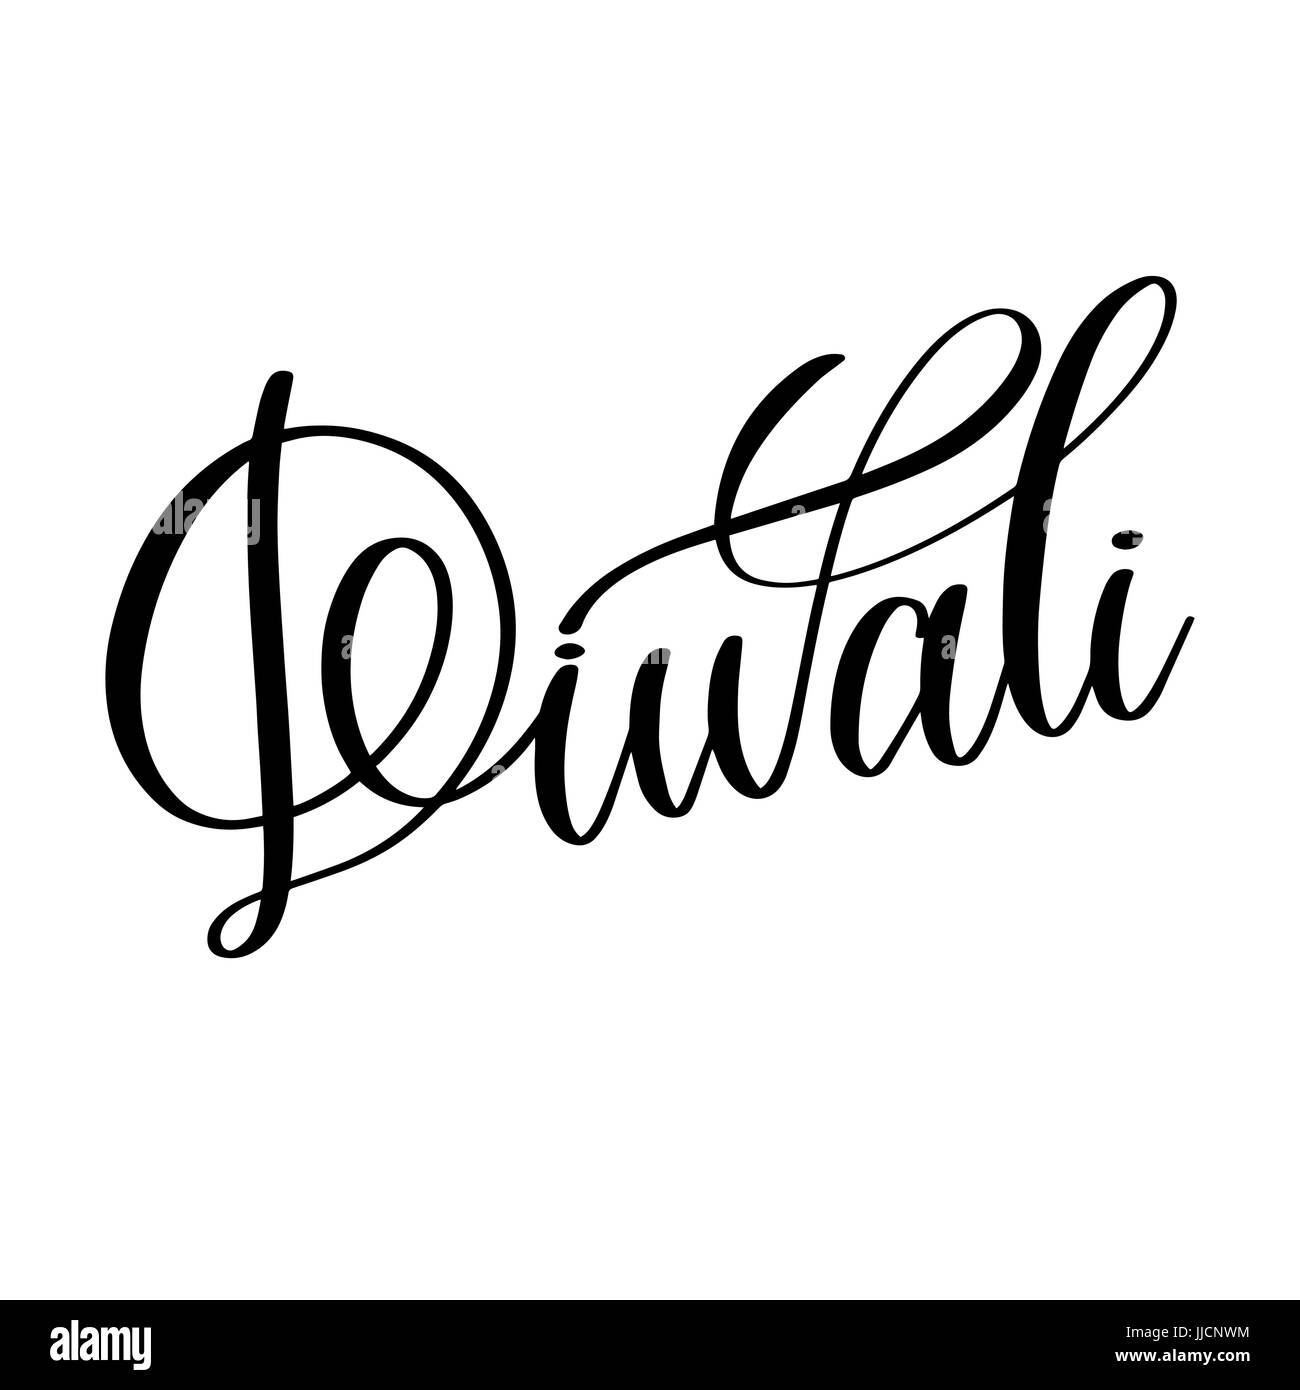 diwali black calligraphy hand lettering text Stock Vector